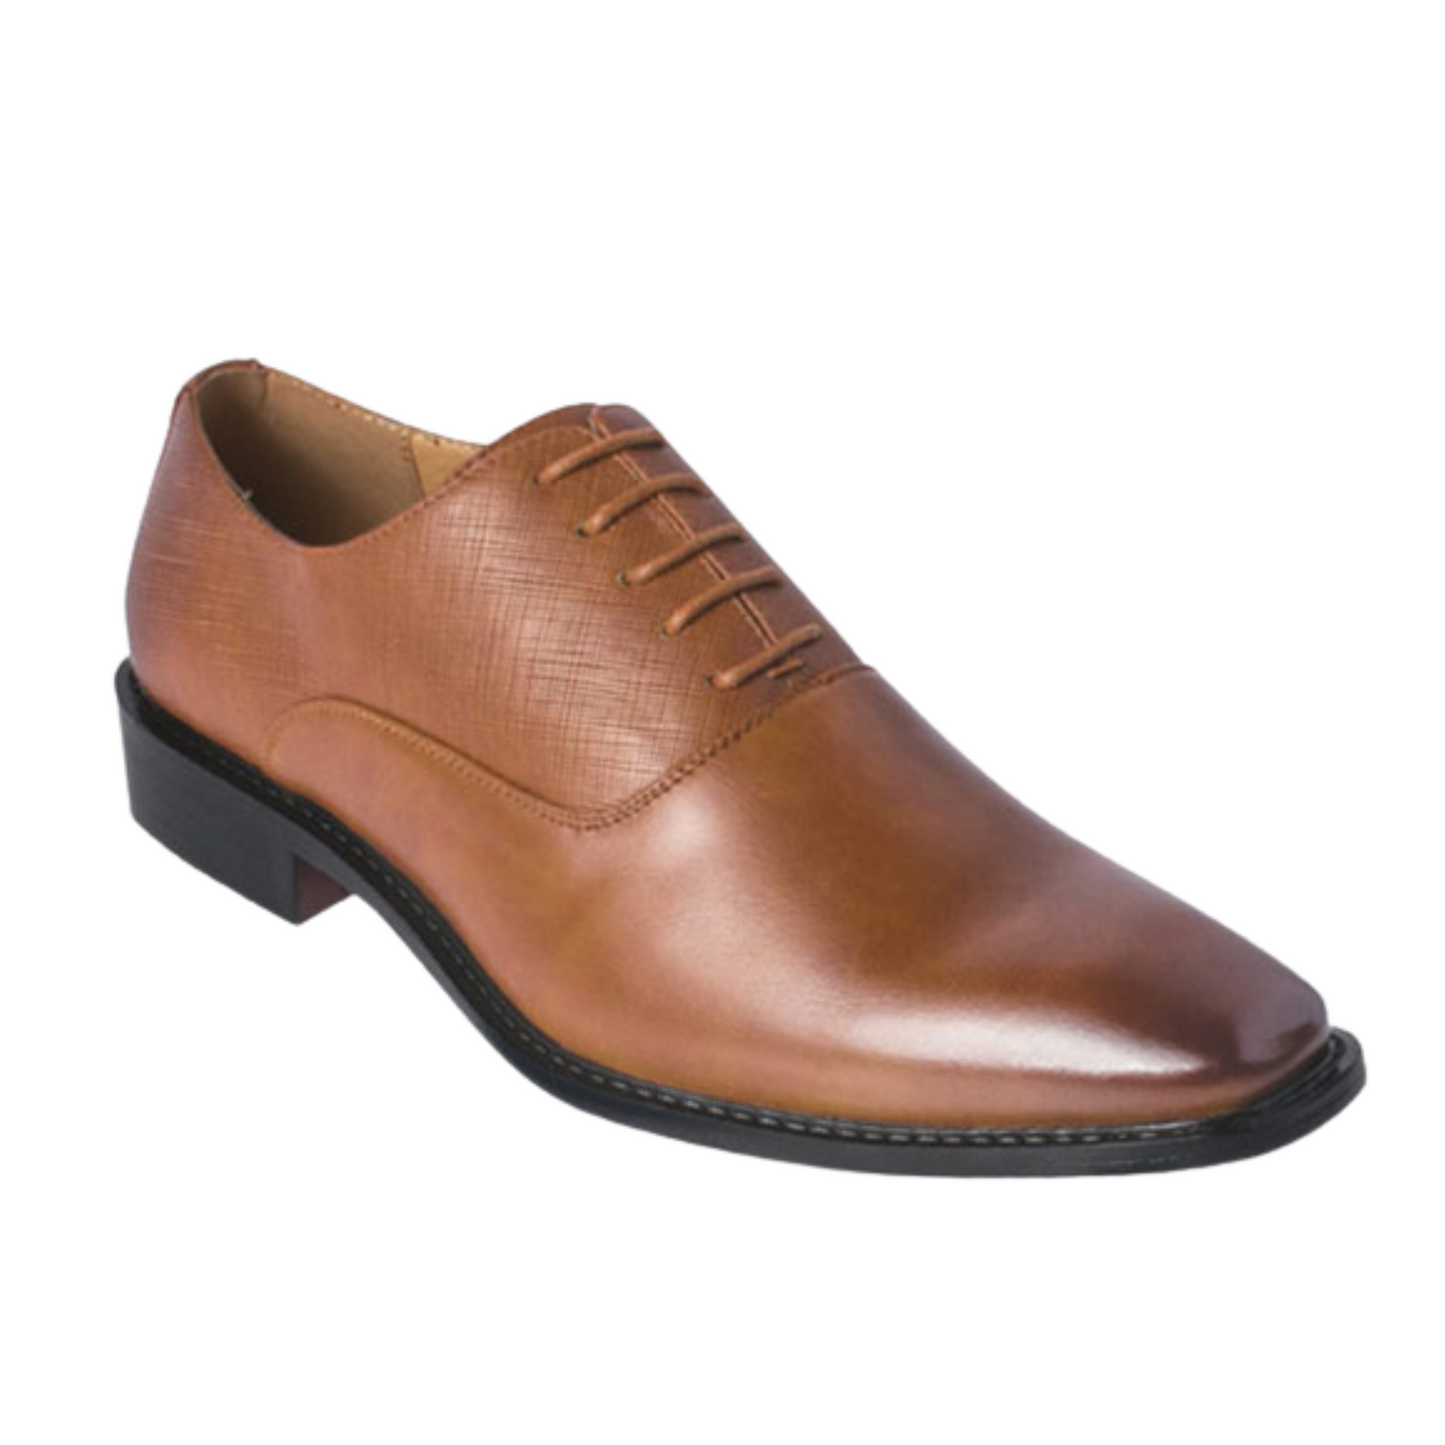 Lincoln Royal Shoes Dress Shoes